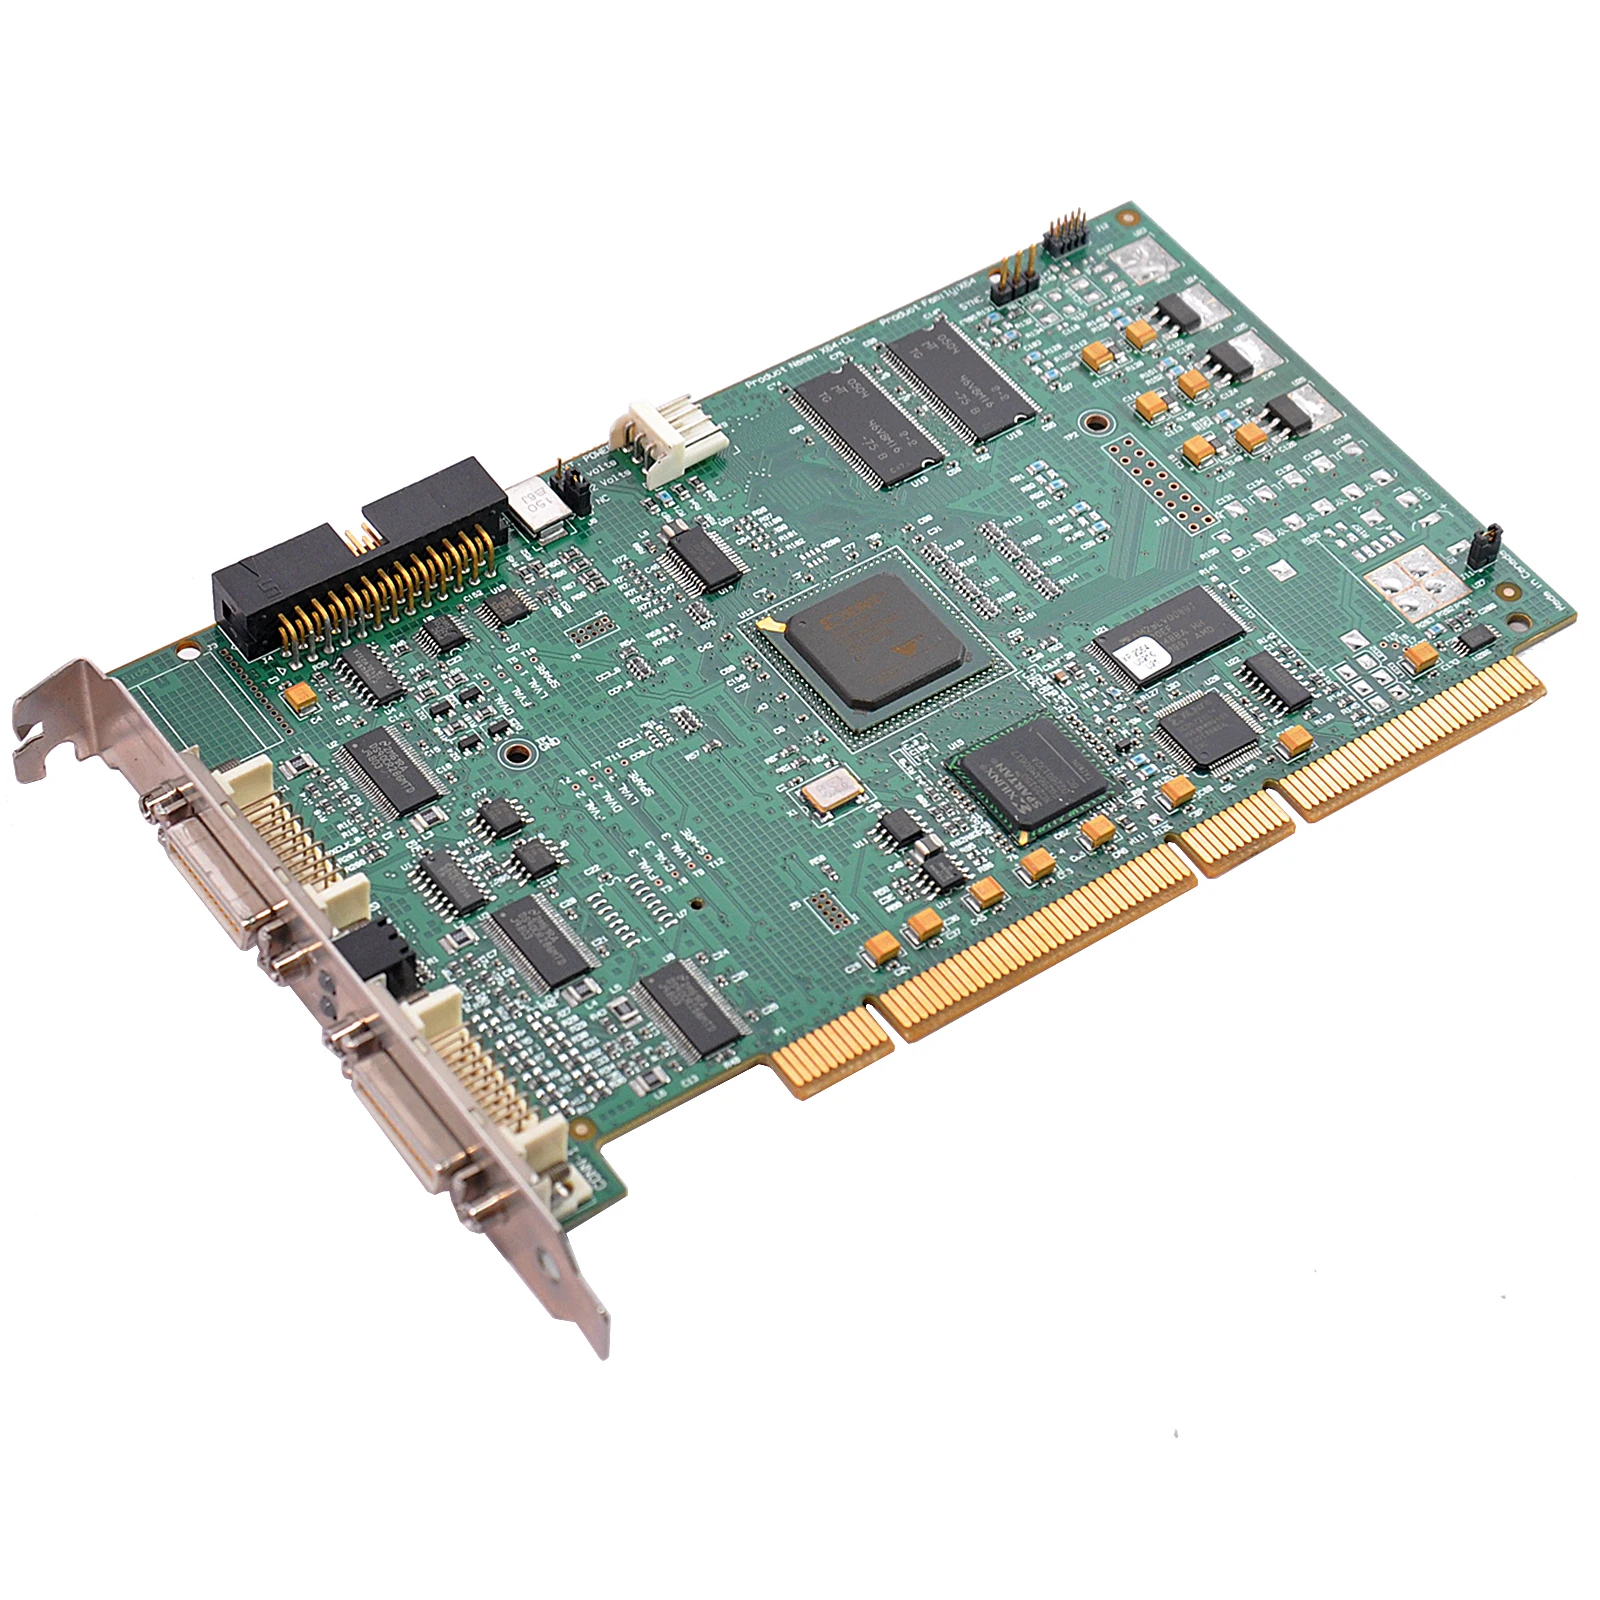 

DALSA X64-CL OC-64C0-00080 Image Capture Card Disassembly